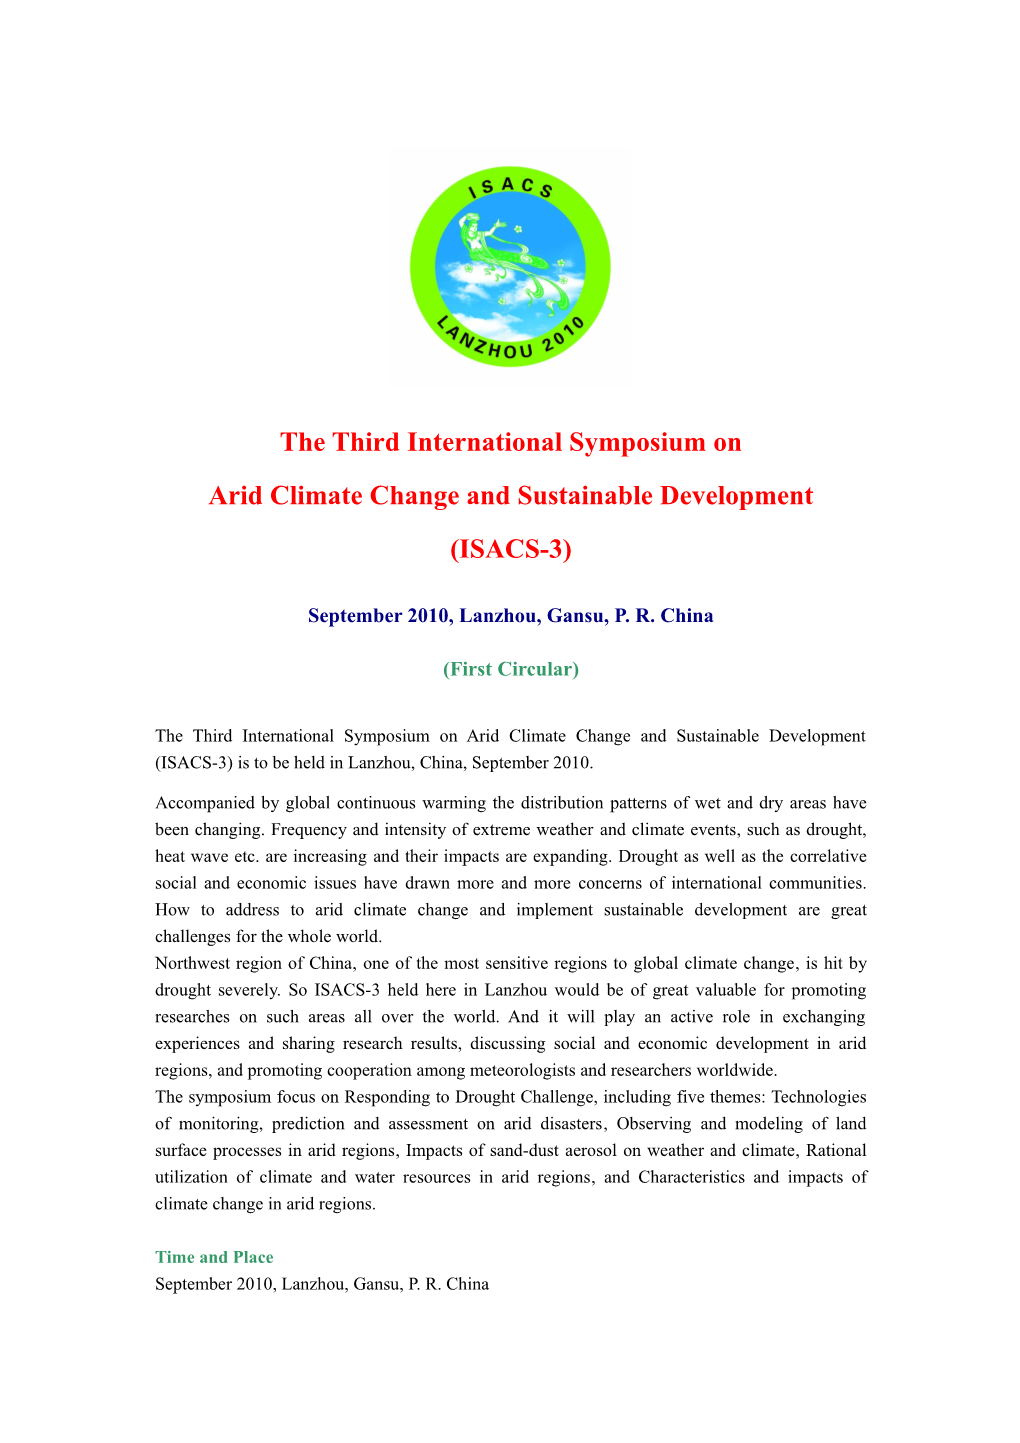 The Second International Symposium on Arid Climate Change And